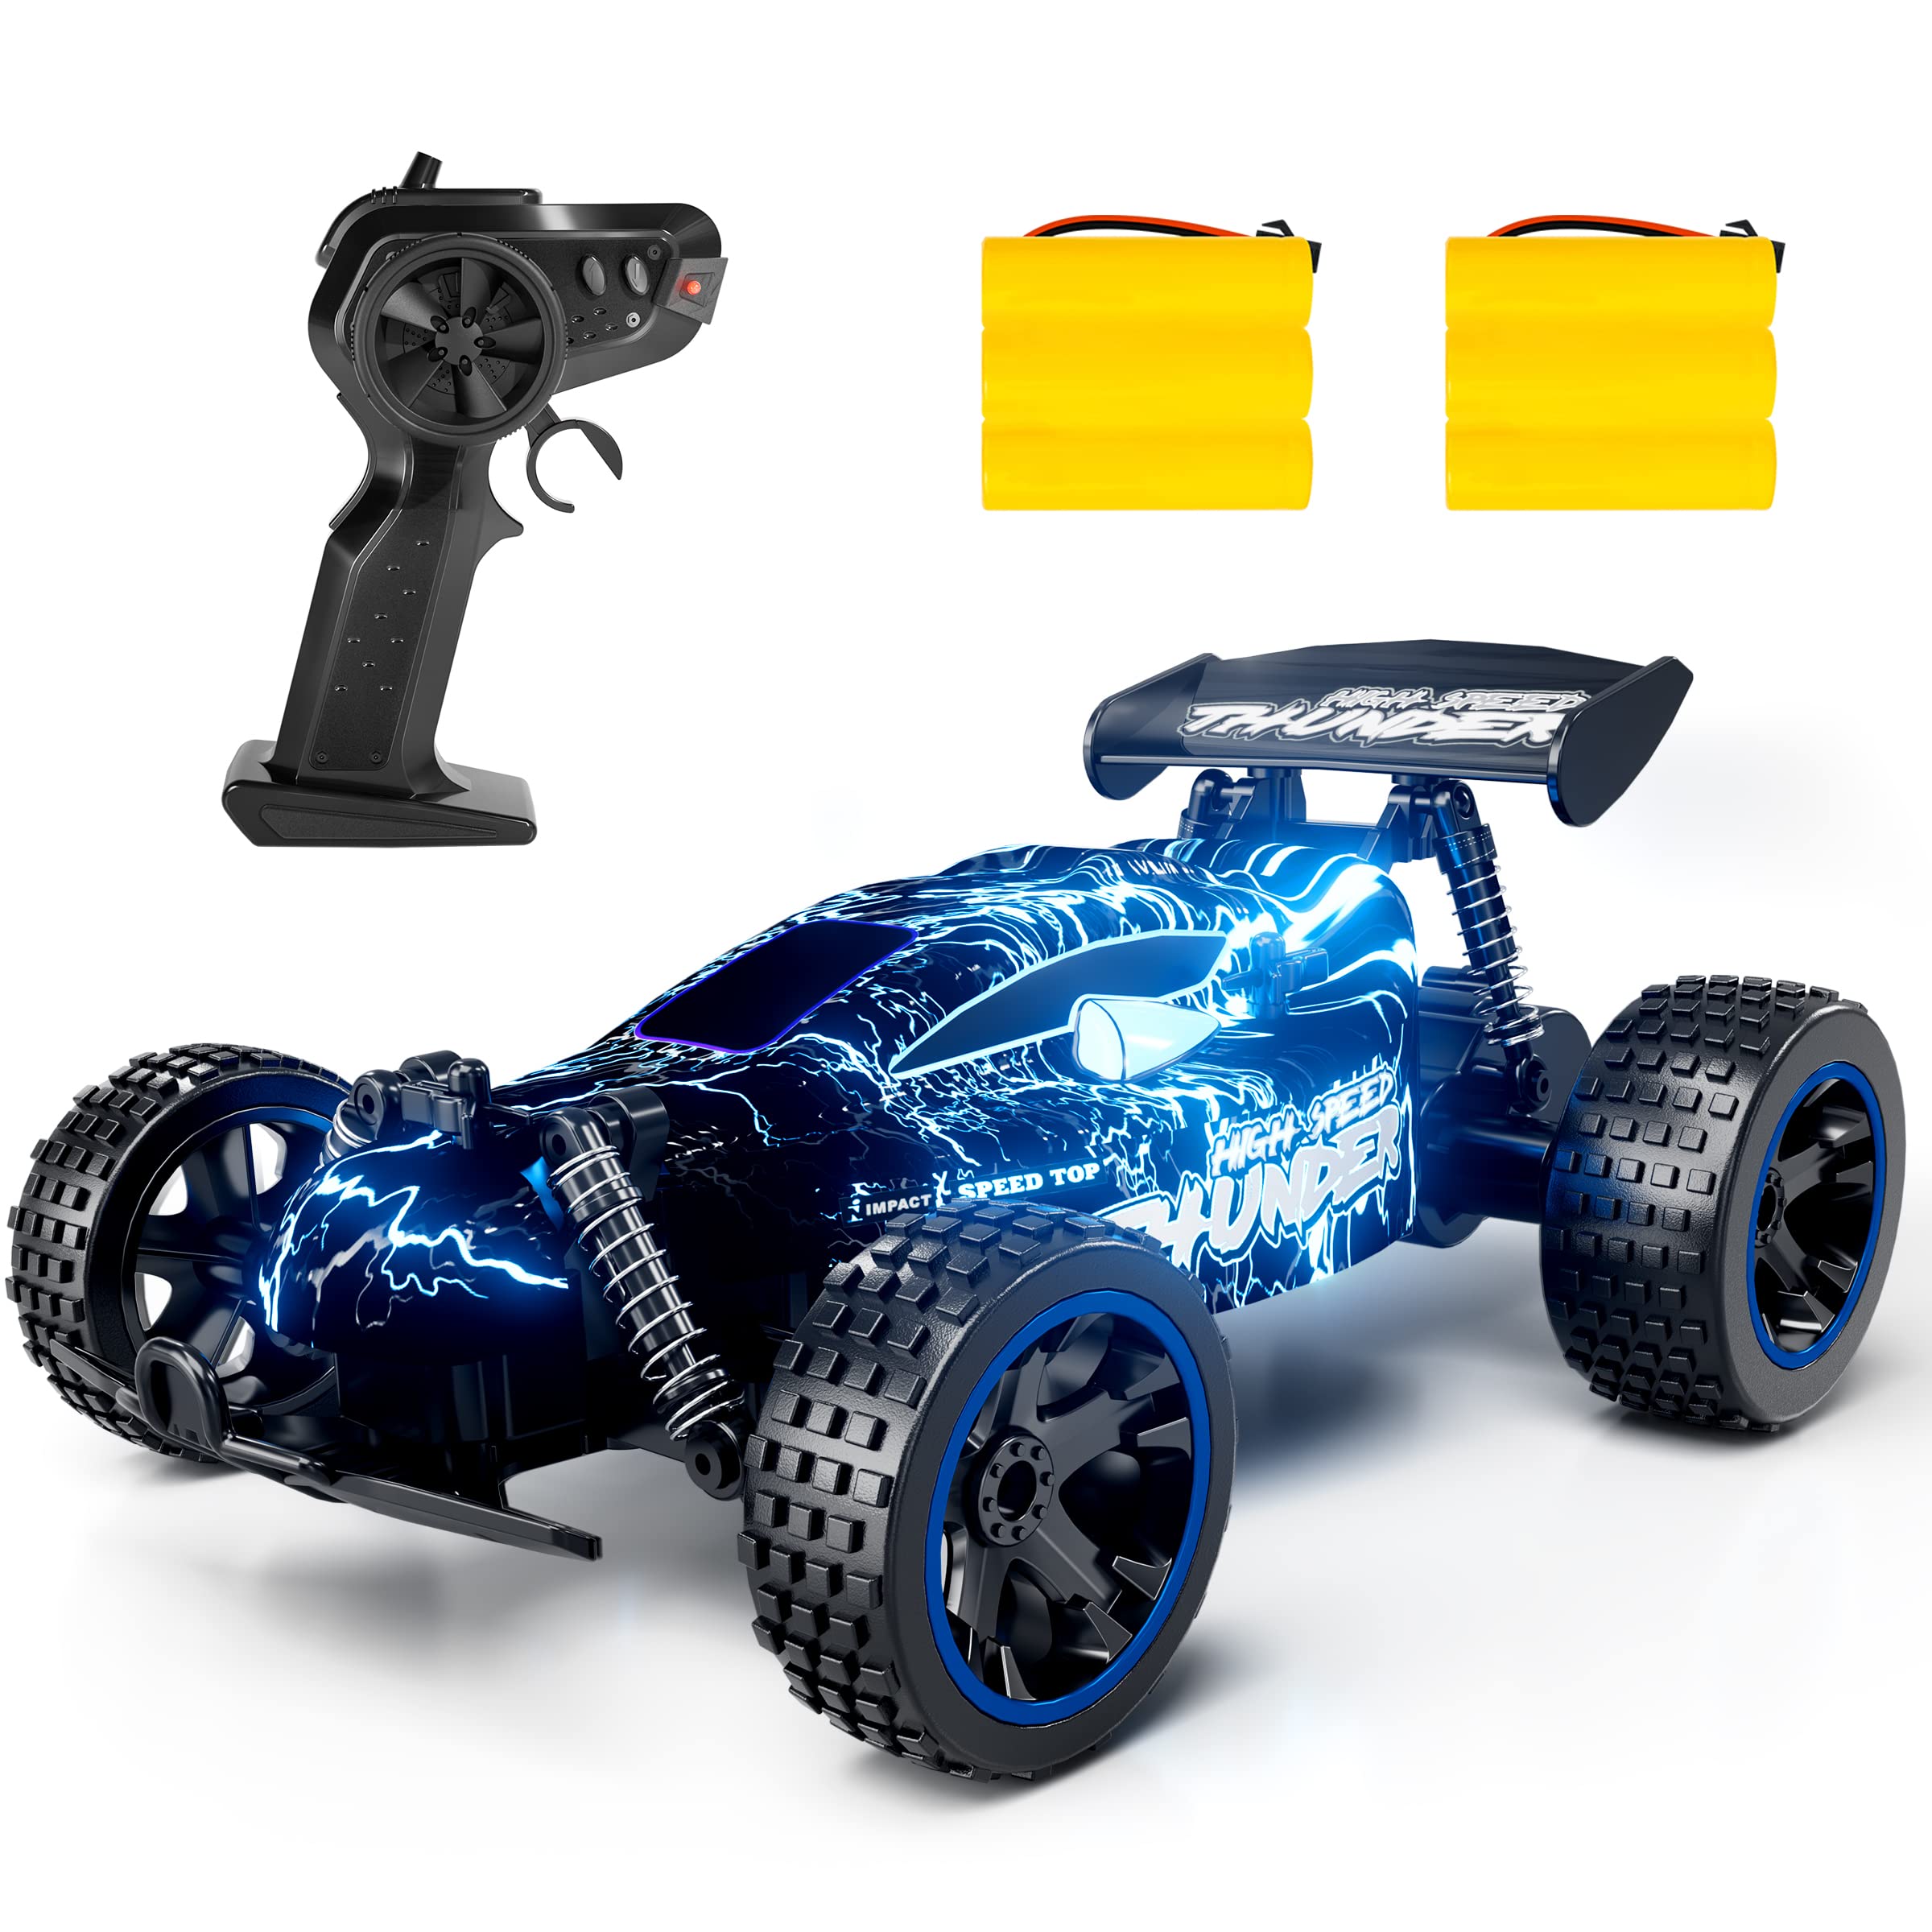 Tecnock Rc Racing car, 2.4ghz High Speed Remote control car, 1:18 2WD Toy cars Buggy for Boys & girls with Two Rechargeable Batt